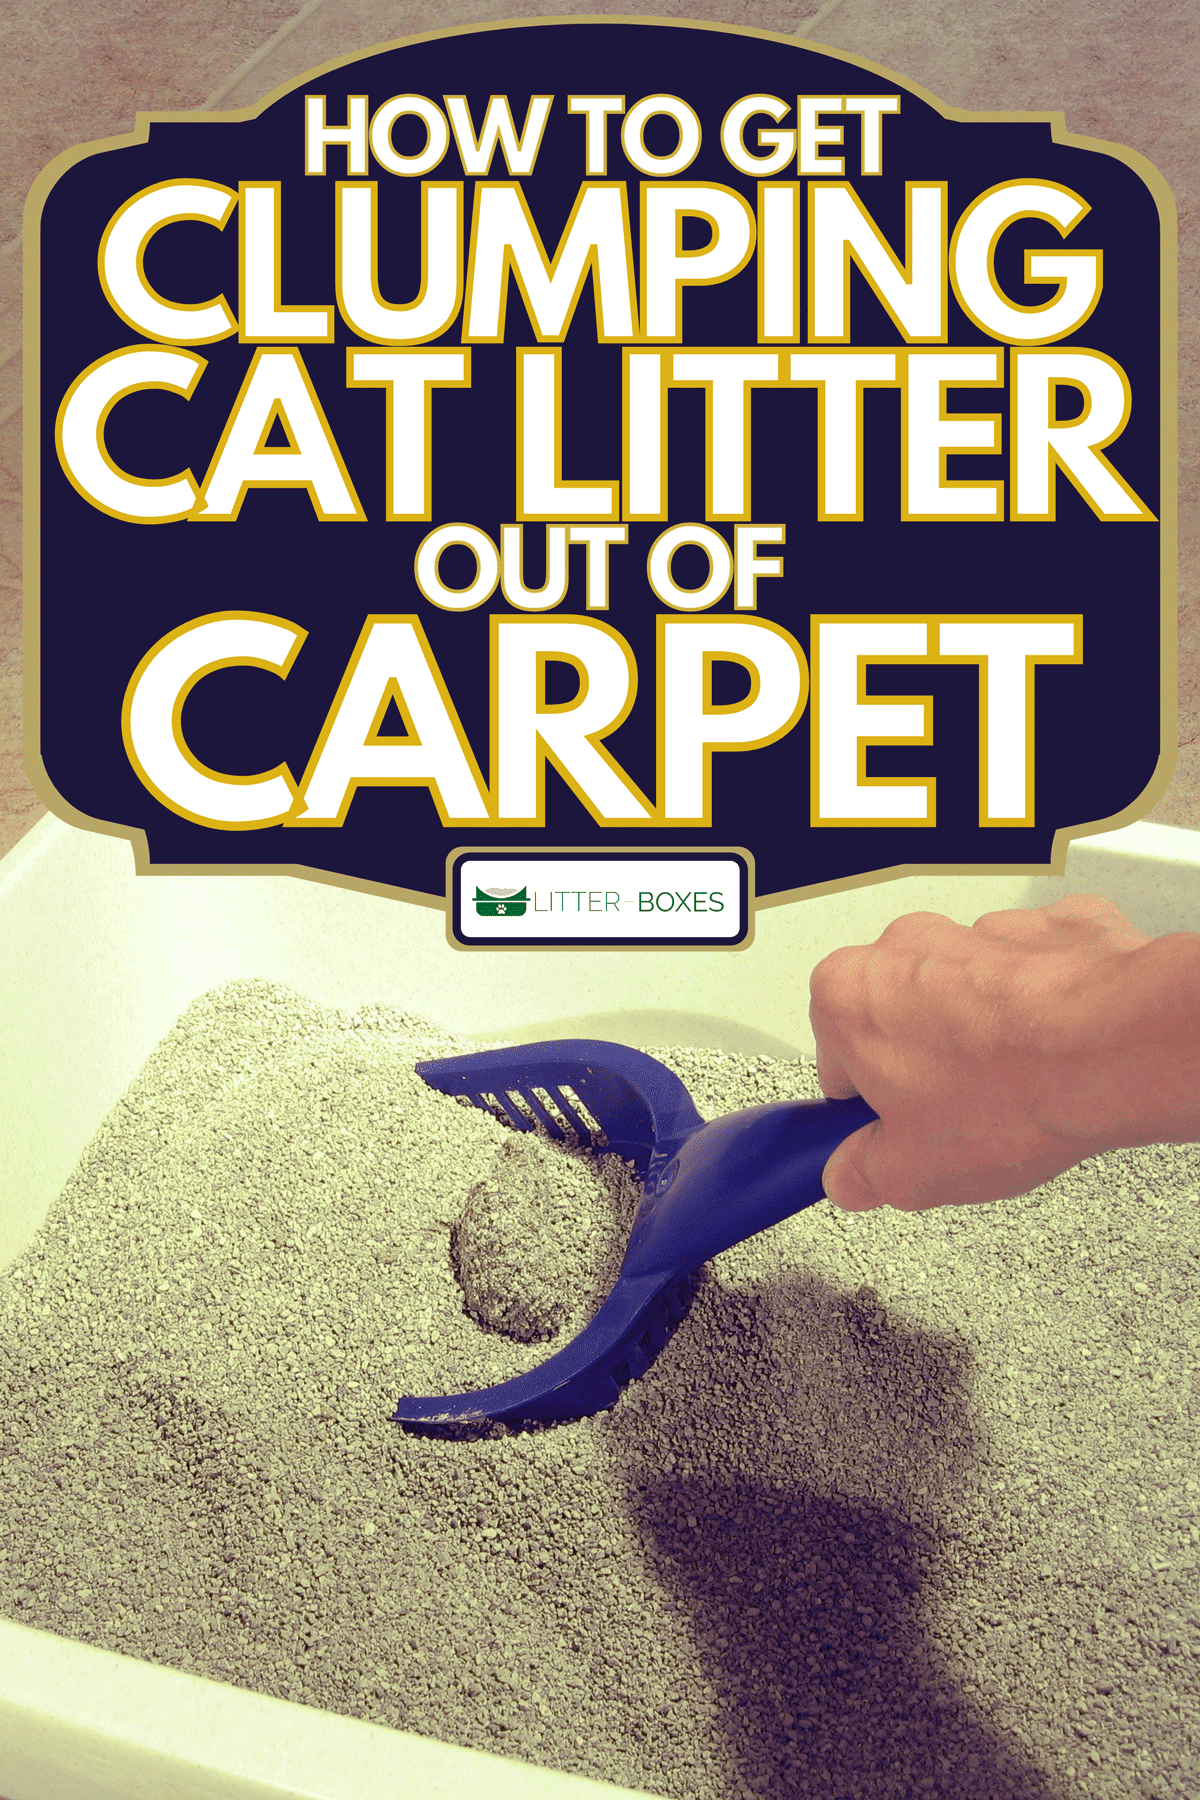 Scooping the cat clumping litter on the litterbox, How To Get Clumping Cat Litter Out Of Carpet